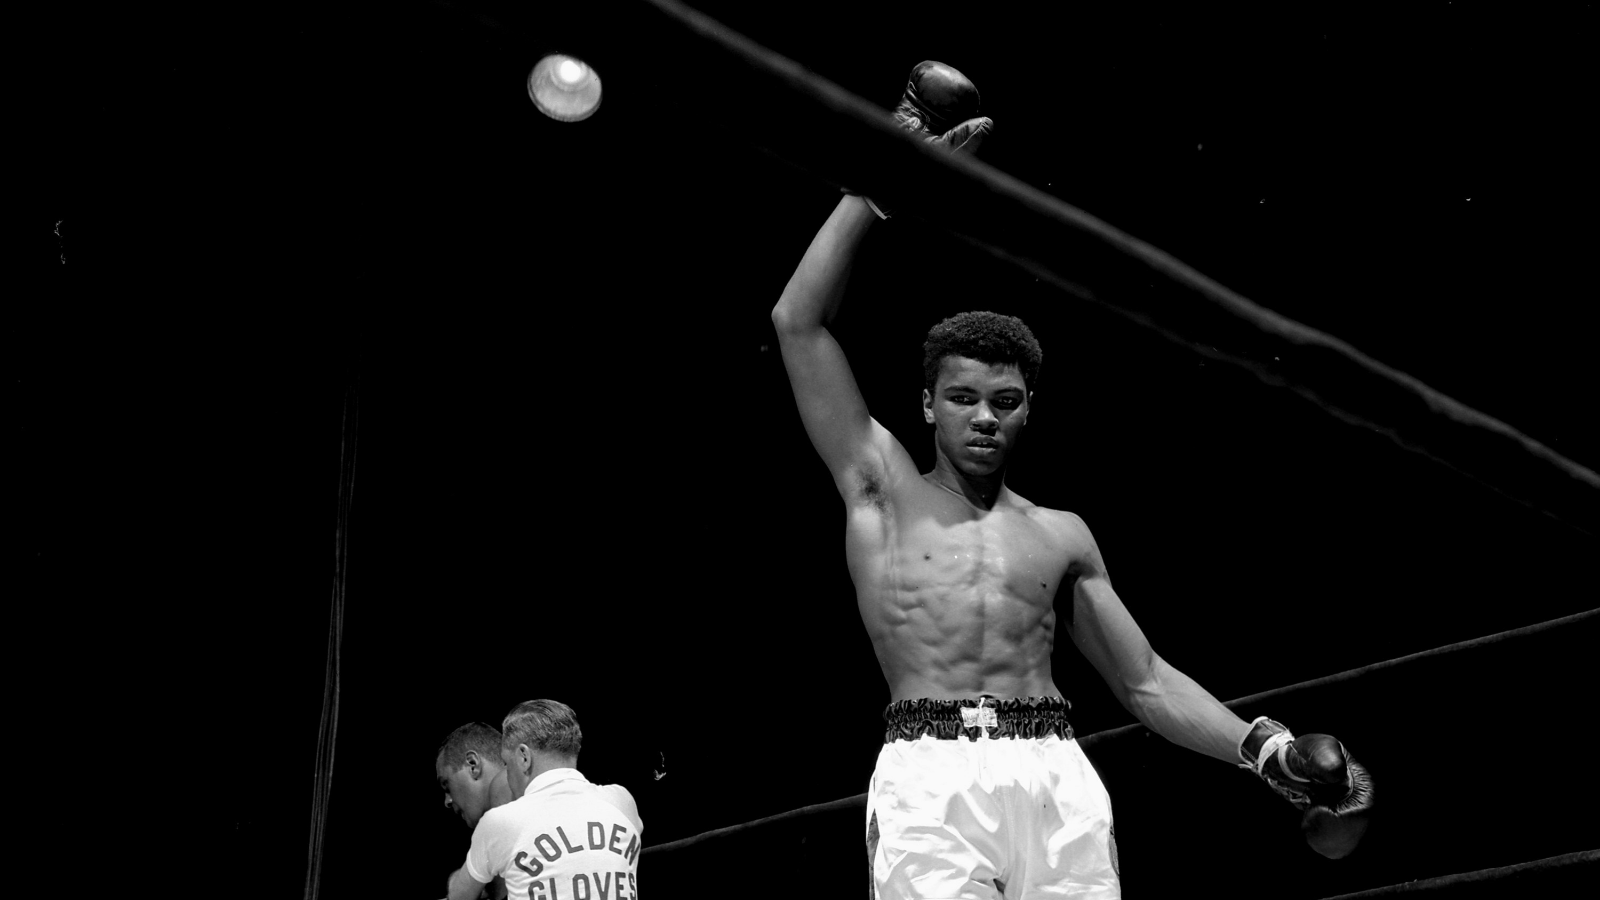 A young man, Cassius Clay, also known as Muhammad Ali, holds his right arm up in the air in victory after a boxing match. He is standing in a boxing ring, wearing white and black boxing shorts and boxing gloves.